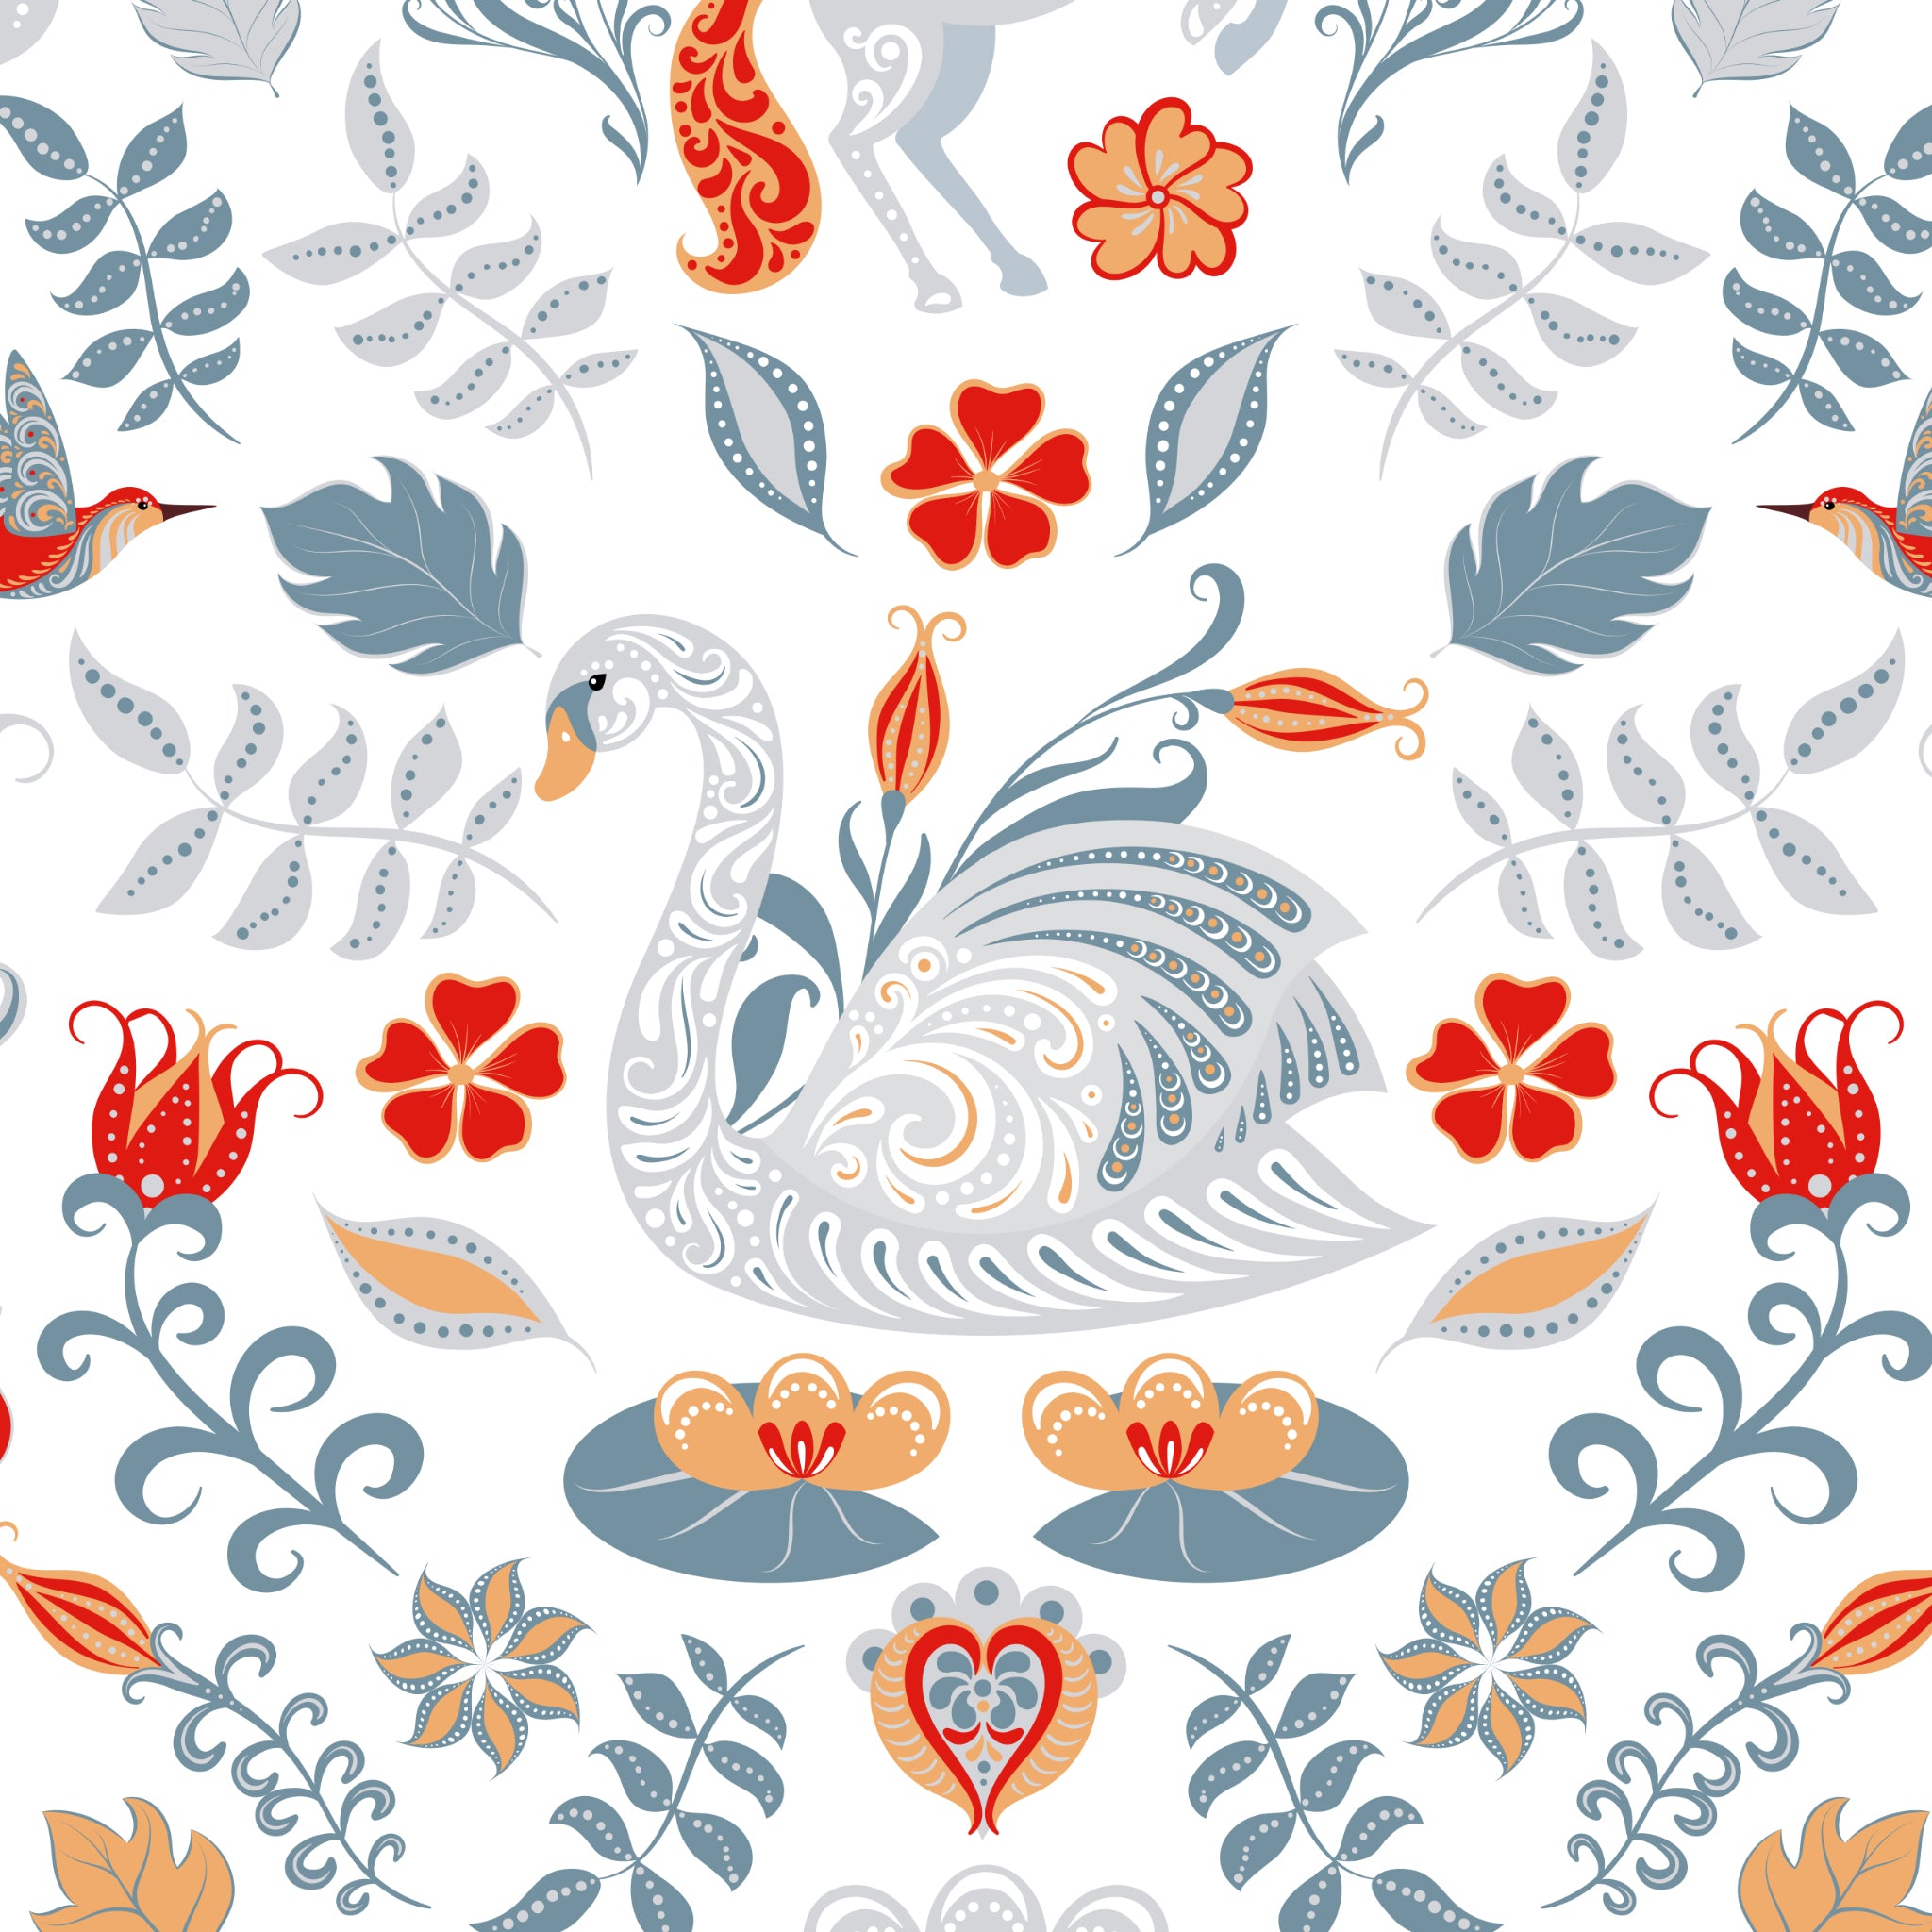 "Wall Blush Storybook Wallpaper featuring whimsical swan design for a playful kid's room decor focus."